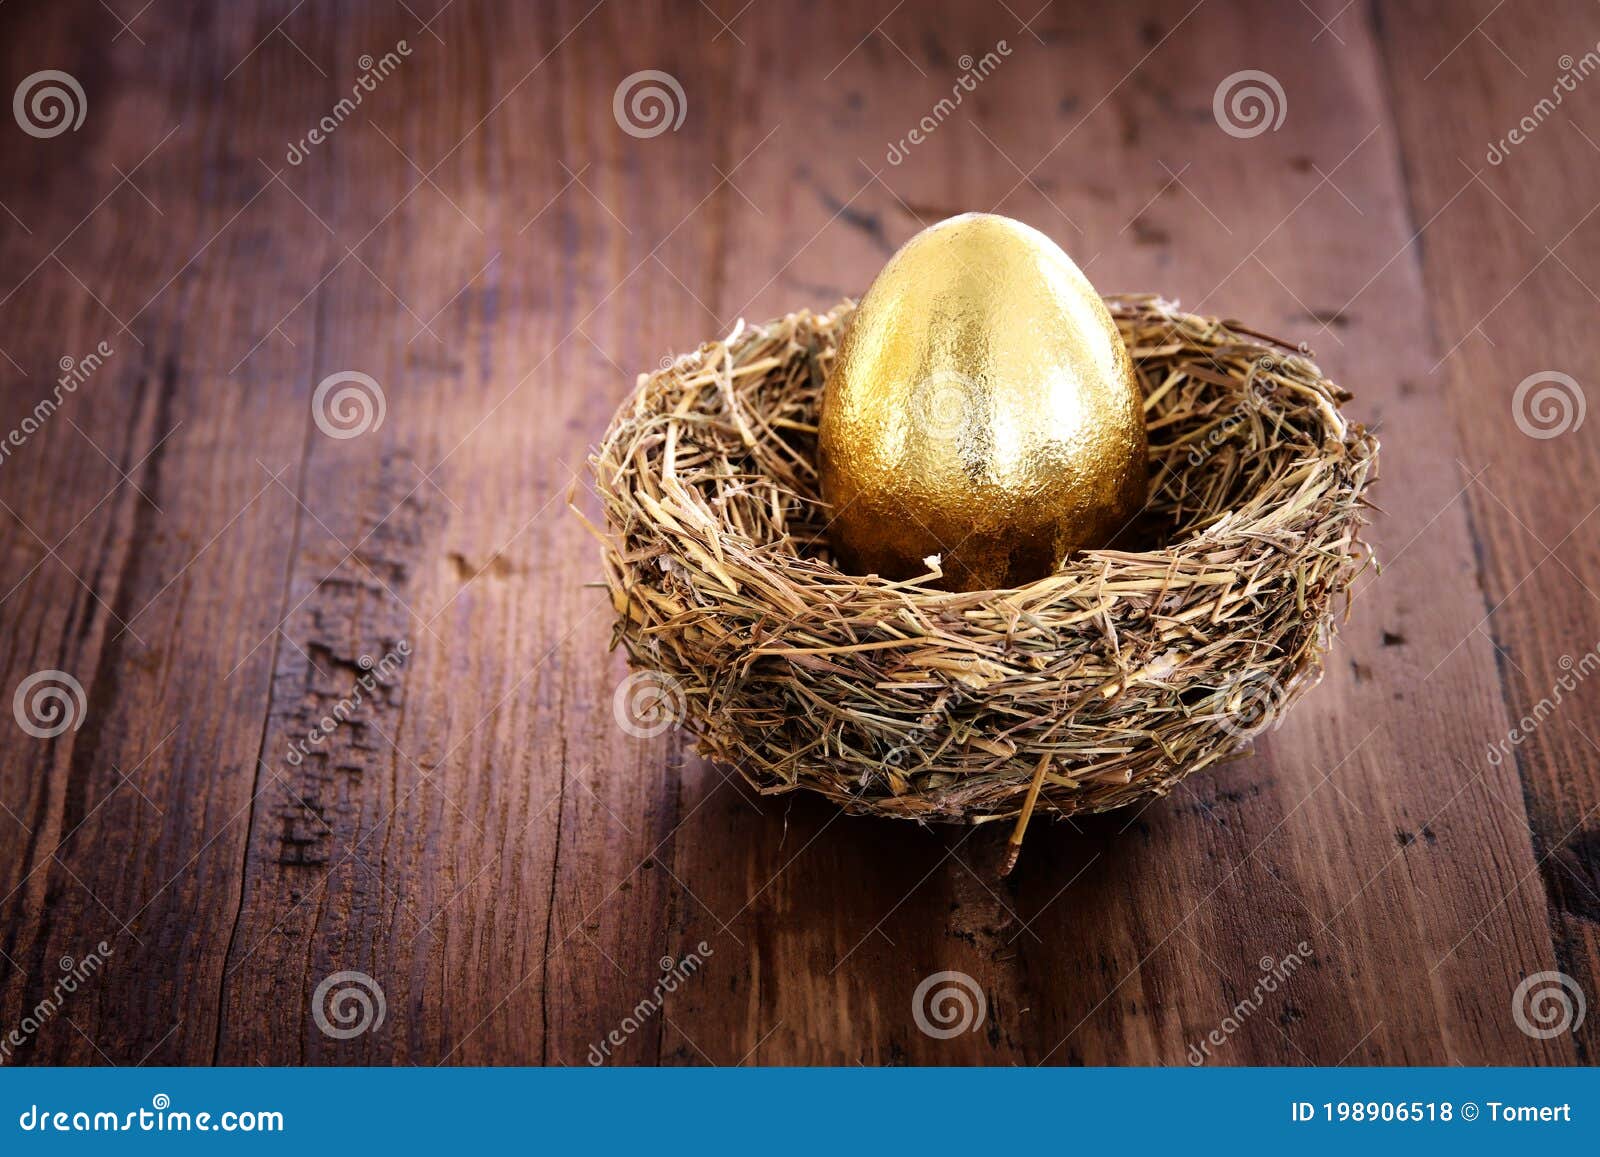 golden egg in nest. concept of investments, savings and pensions